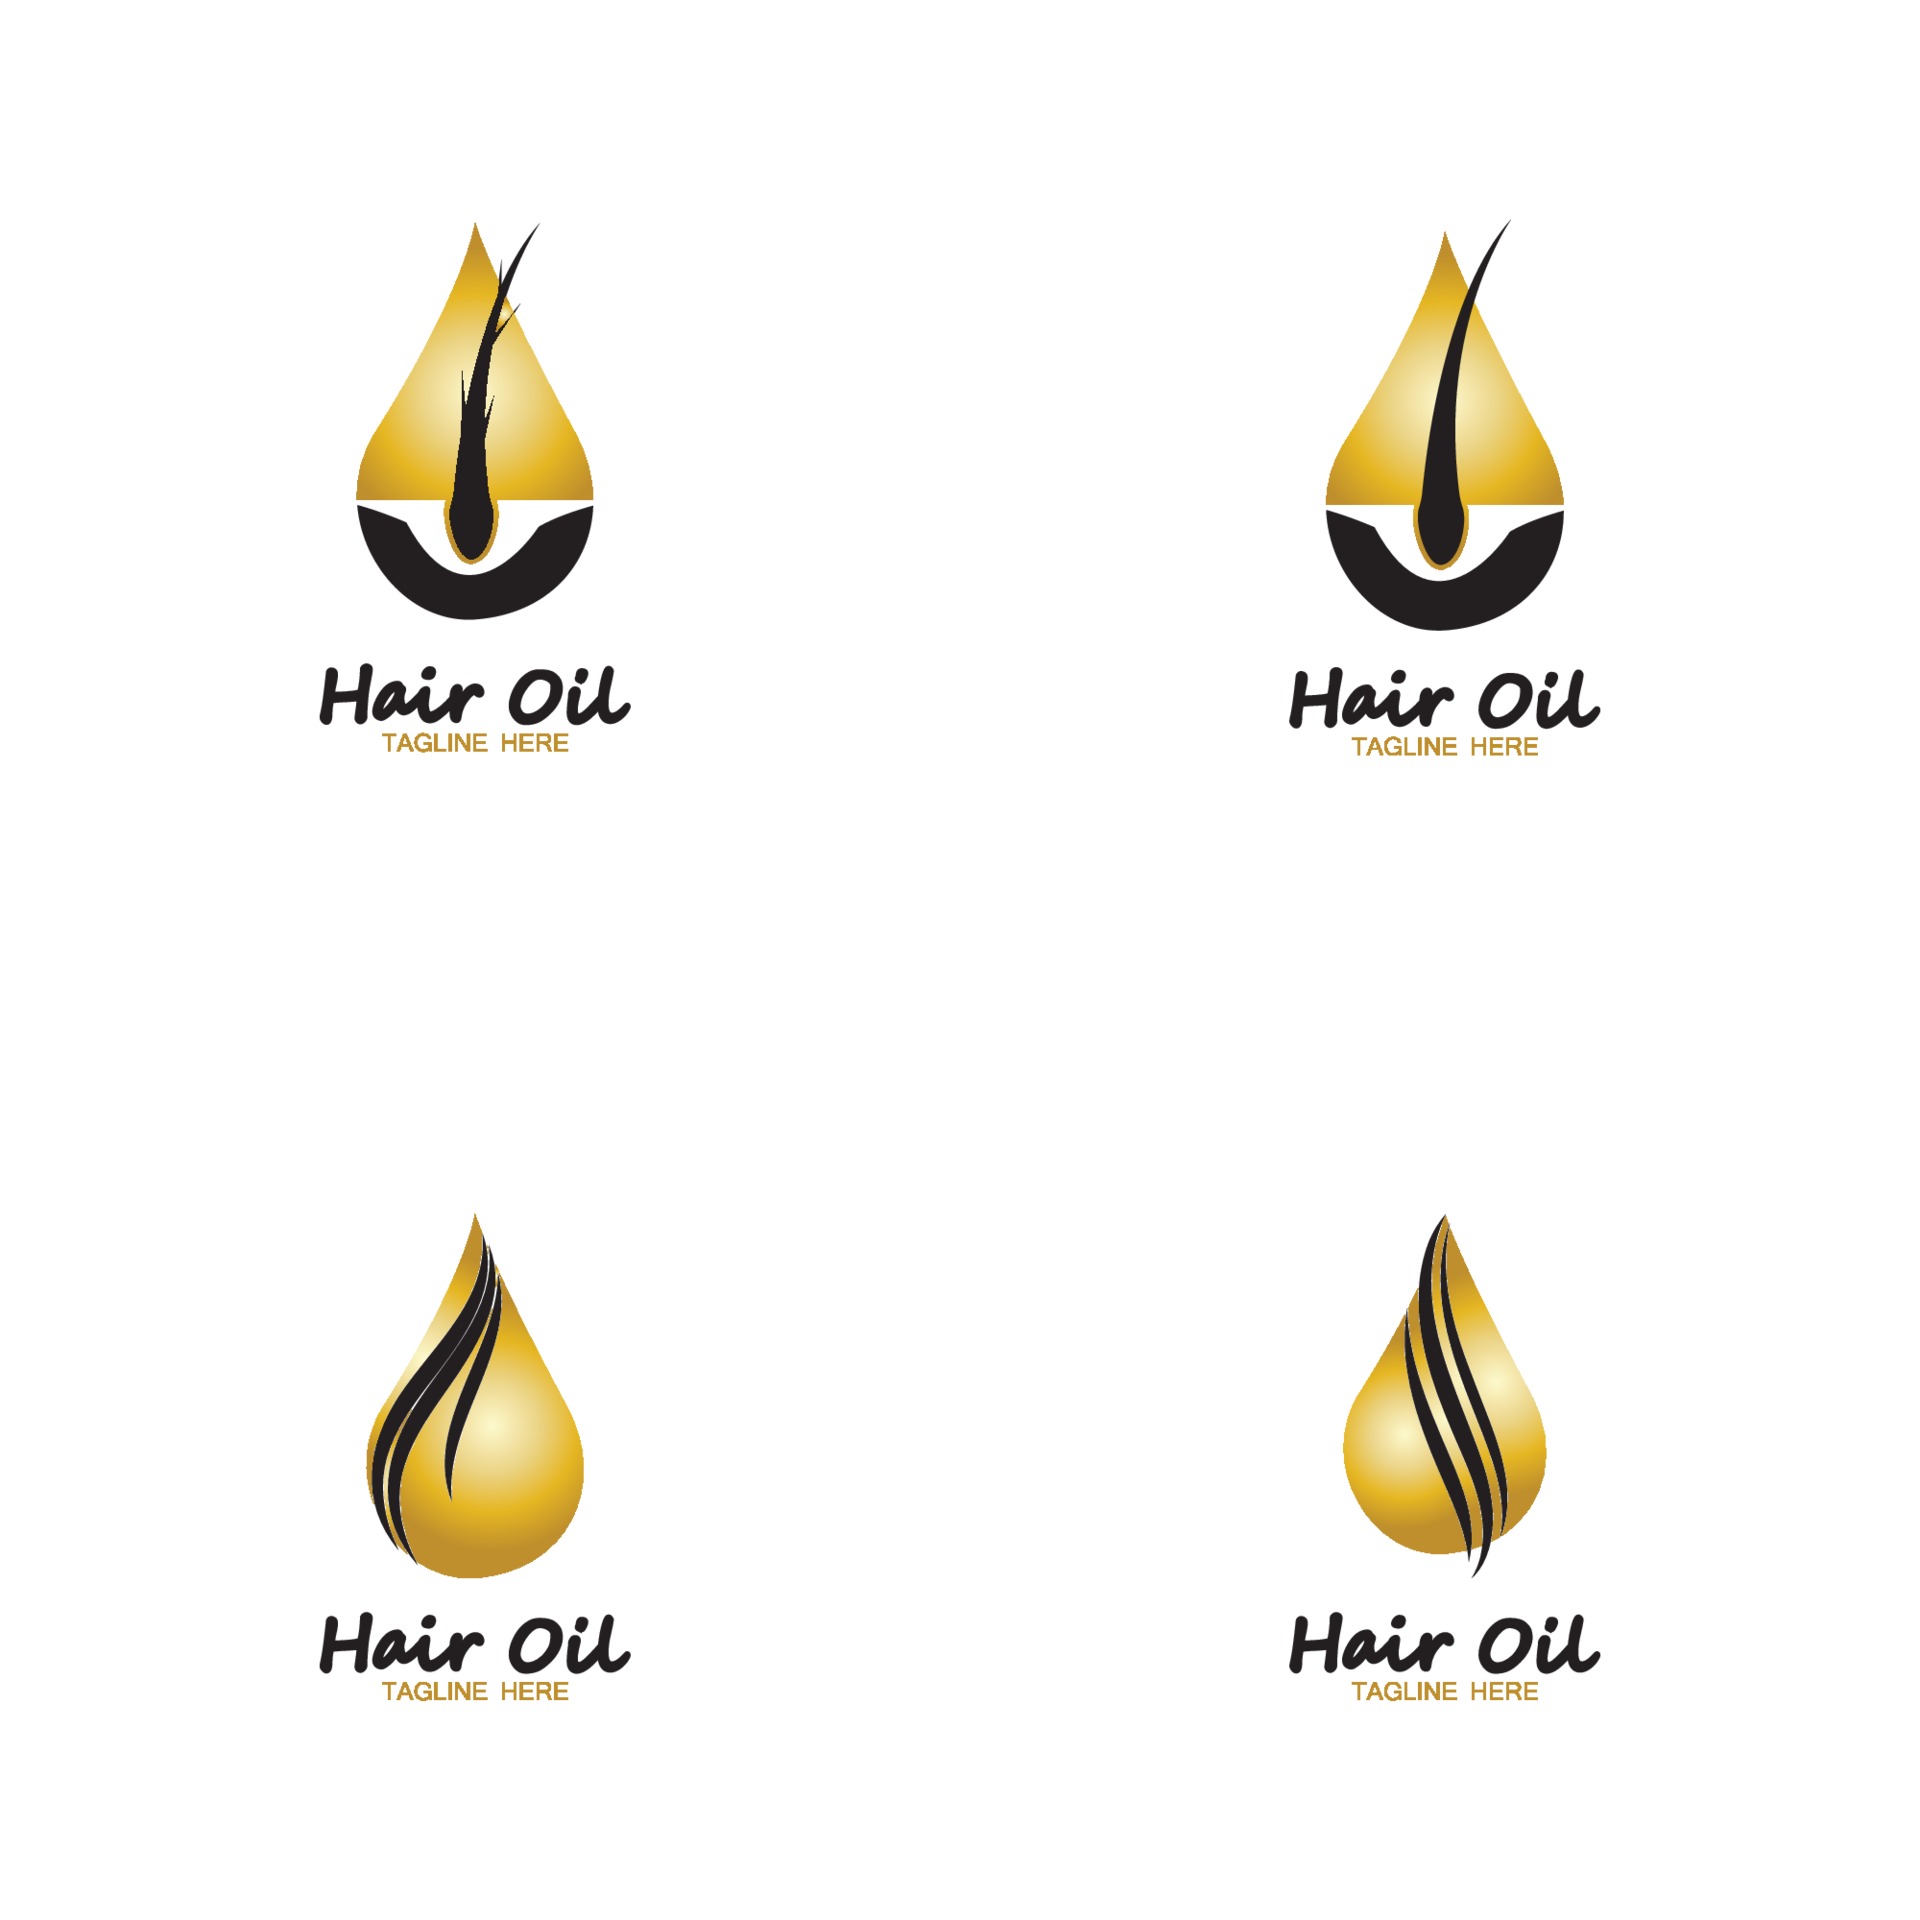 451 Unique Hair Oil And Care Slogans And Taglines  Hair care business  Product slogans Business hairstyles